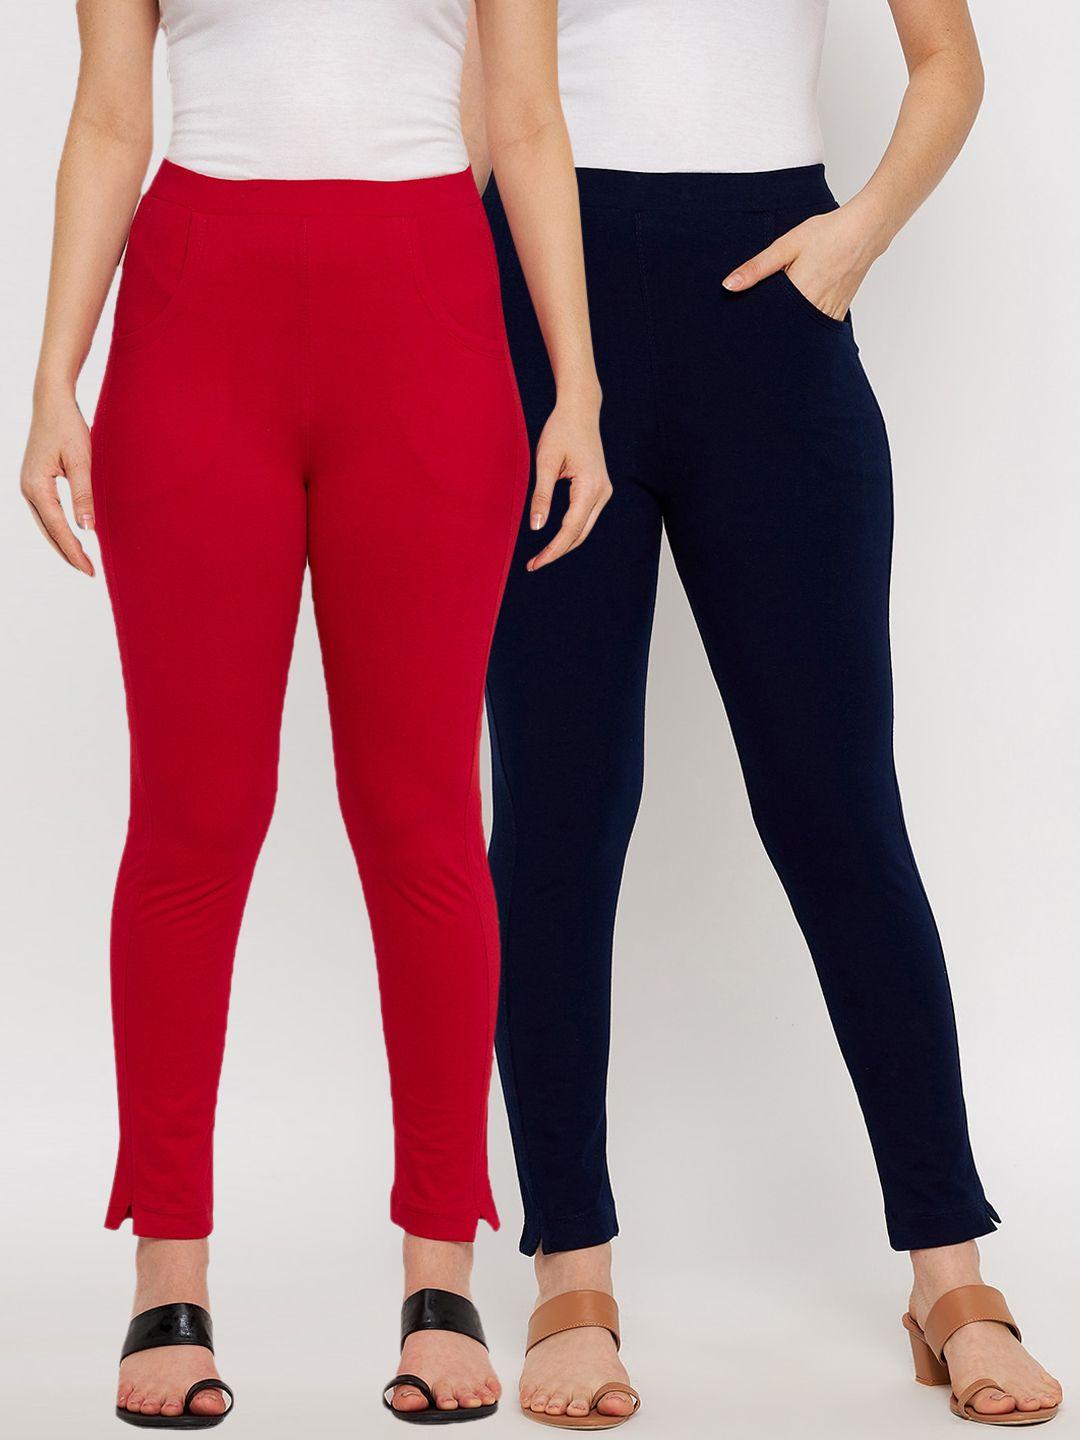 Clora Creation Women Pack of 2 Solid Red and Navy Blue Ankle Length Leggings